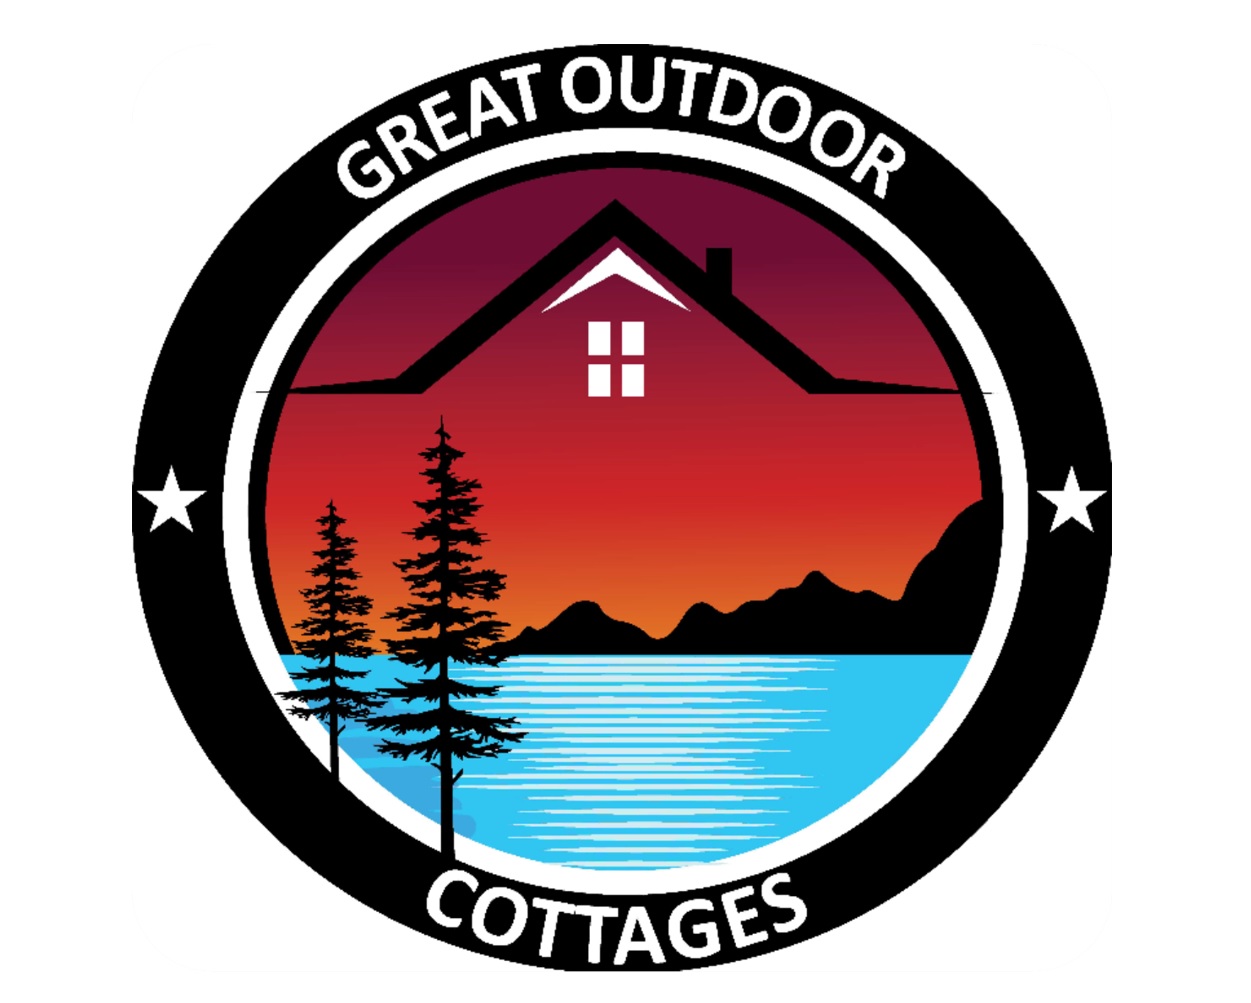 Great Outdoor Cottages LLC